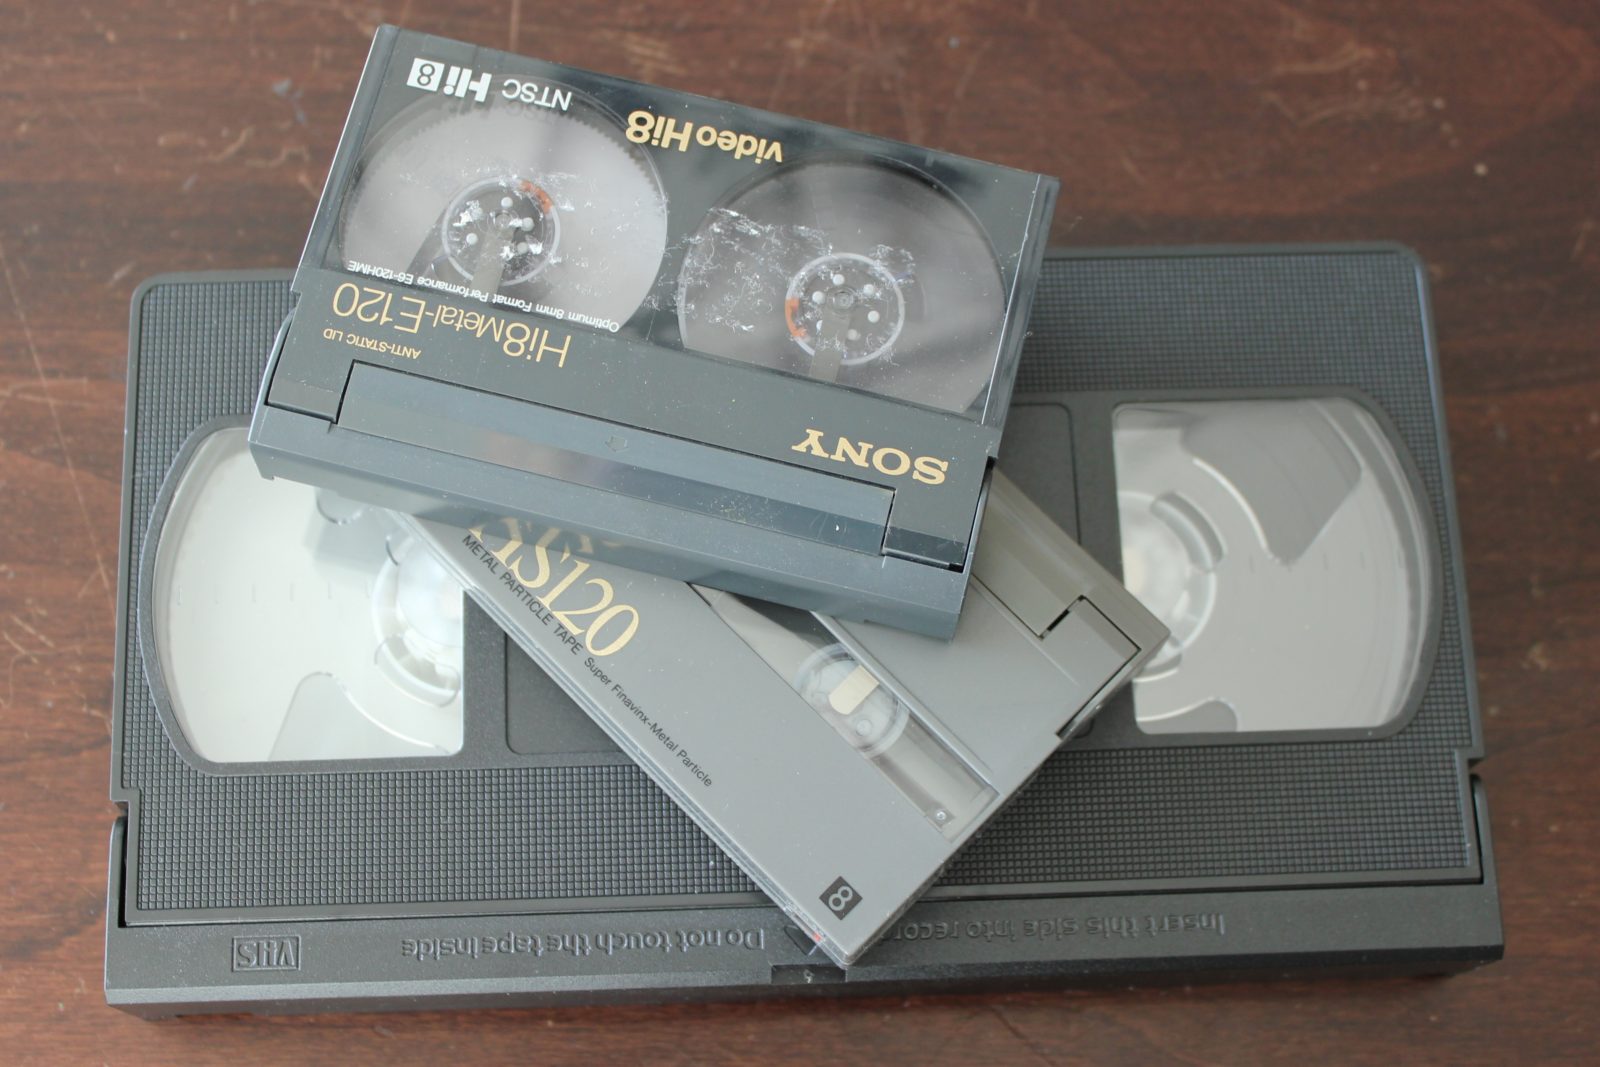 Family Photo Solutions - Convert VHS and Camcorder Tapes to Digital Video